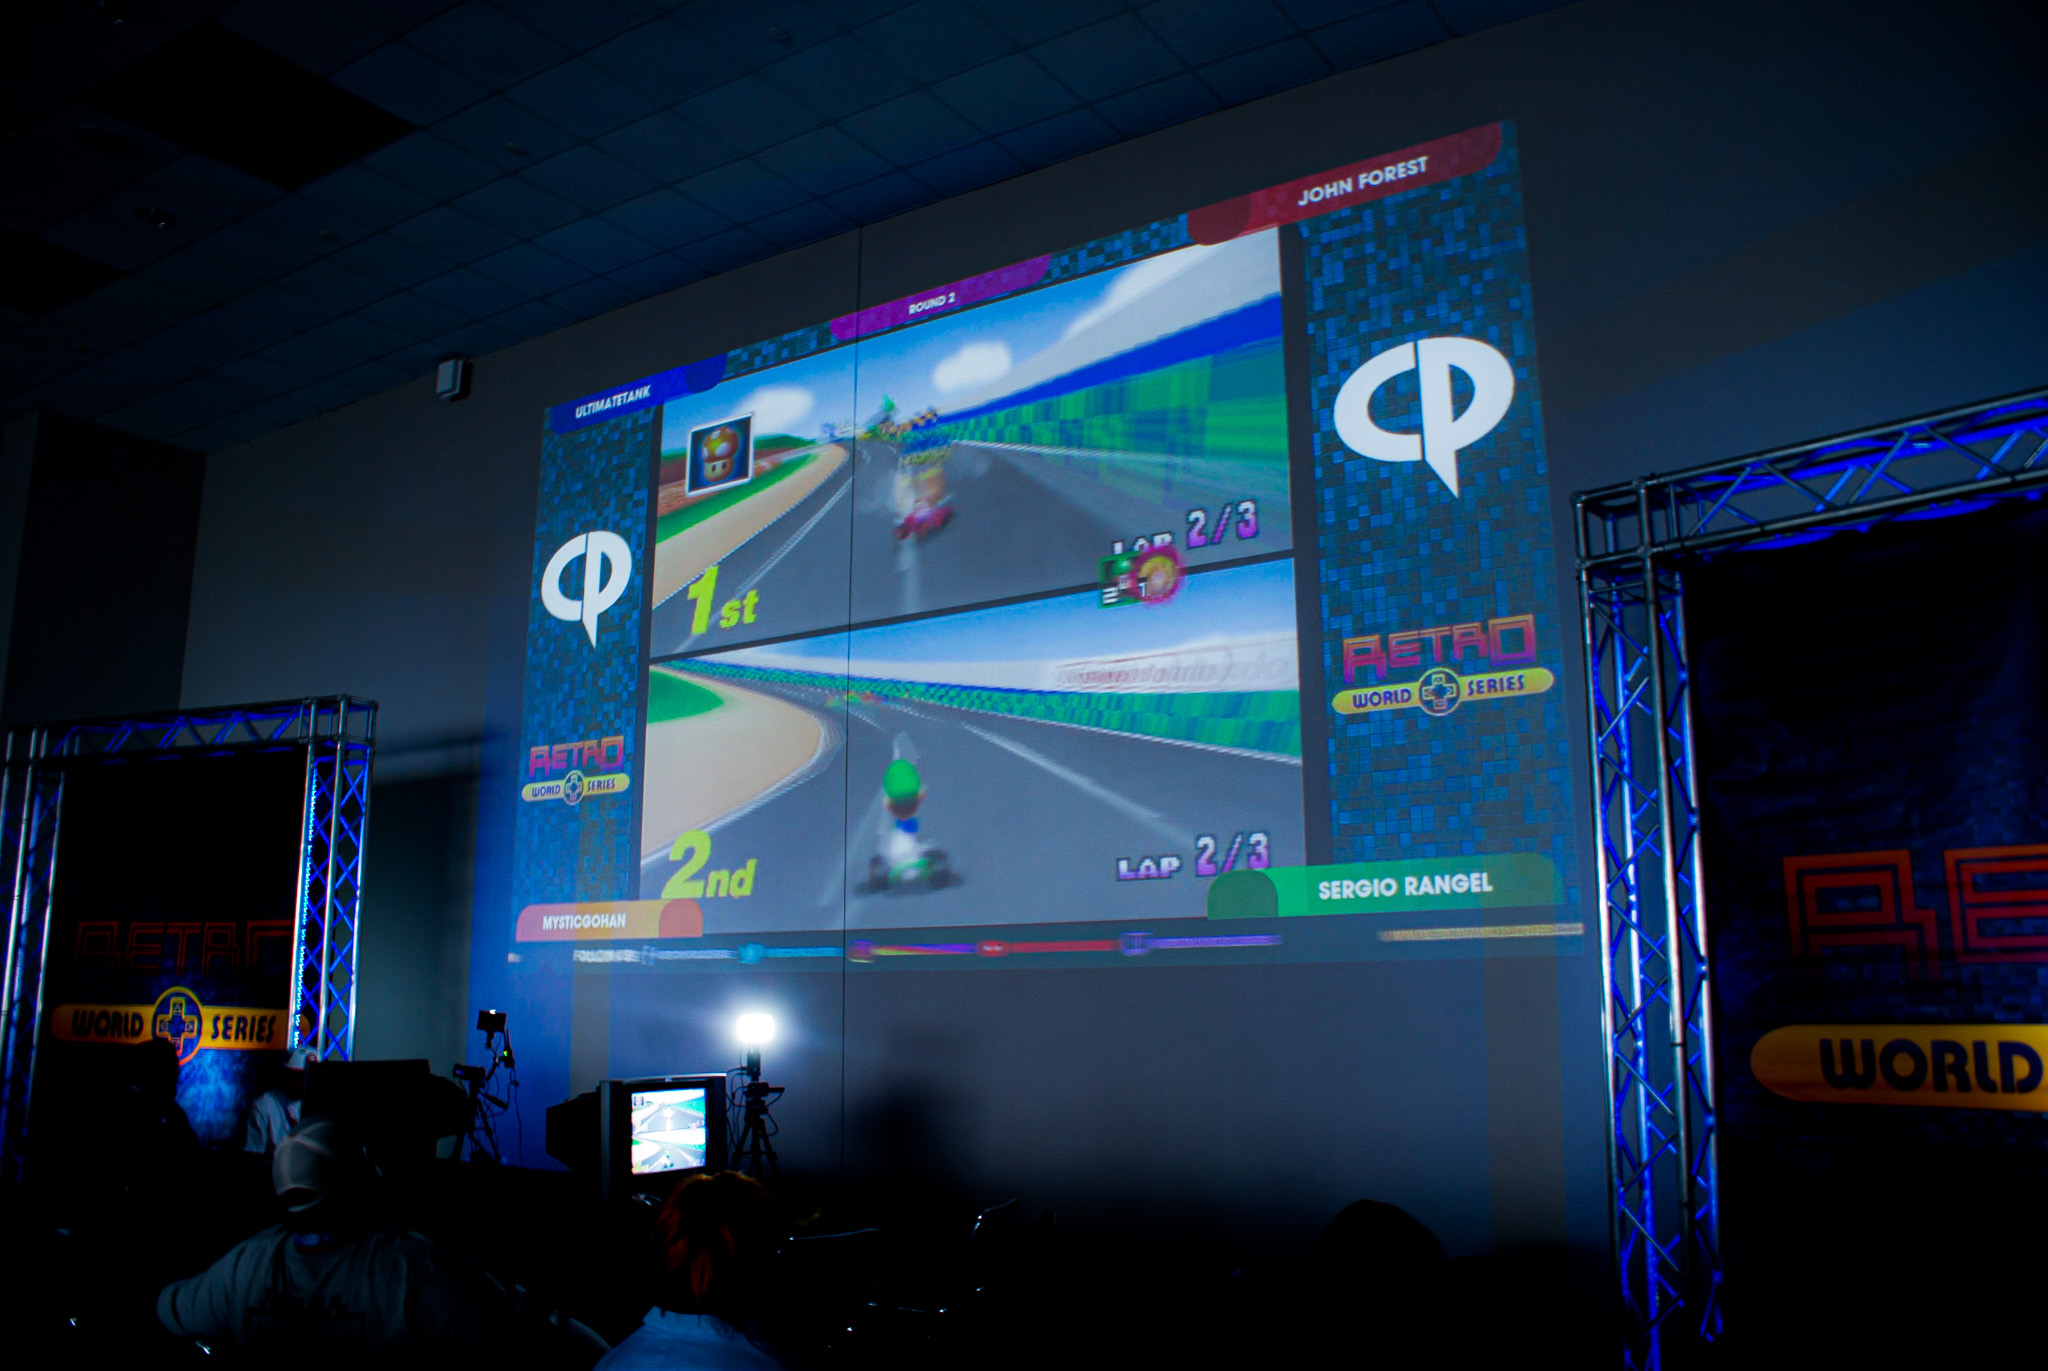 Retro World Series returned to host another classic game tournament, the games that were played were Mario Kart and Super Smash Bros (classic and melee). Photo by reporter Adan Martinez.